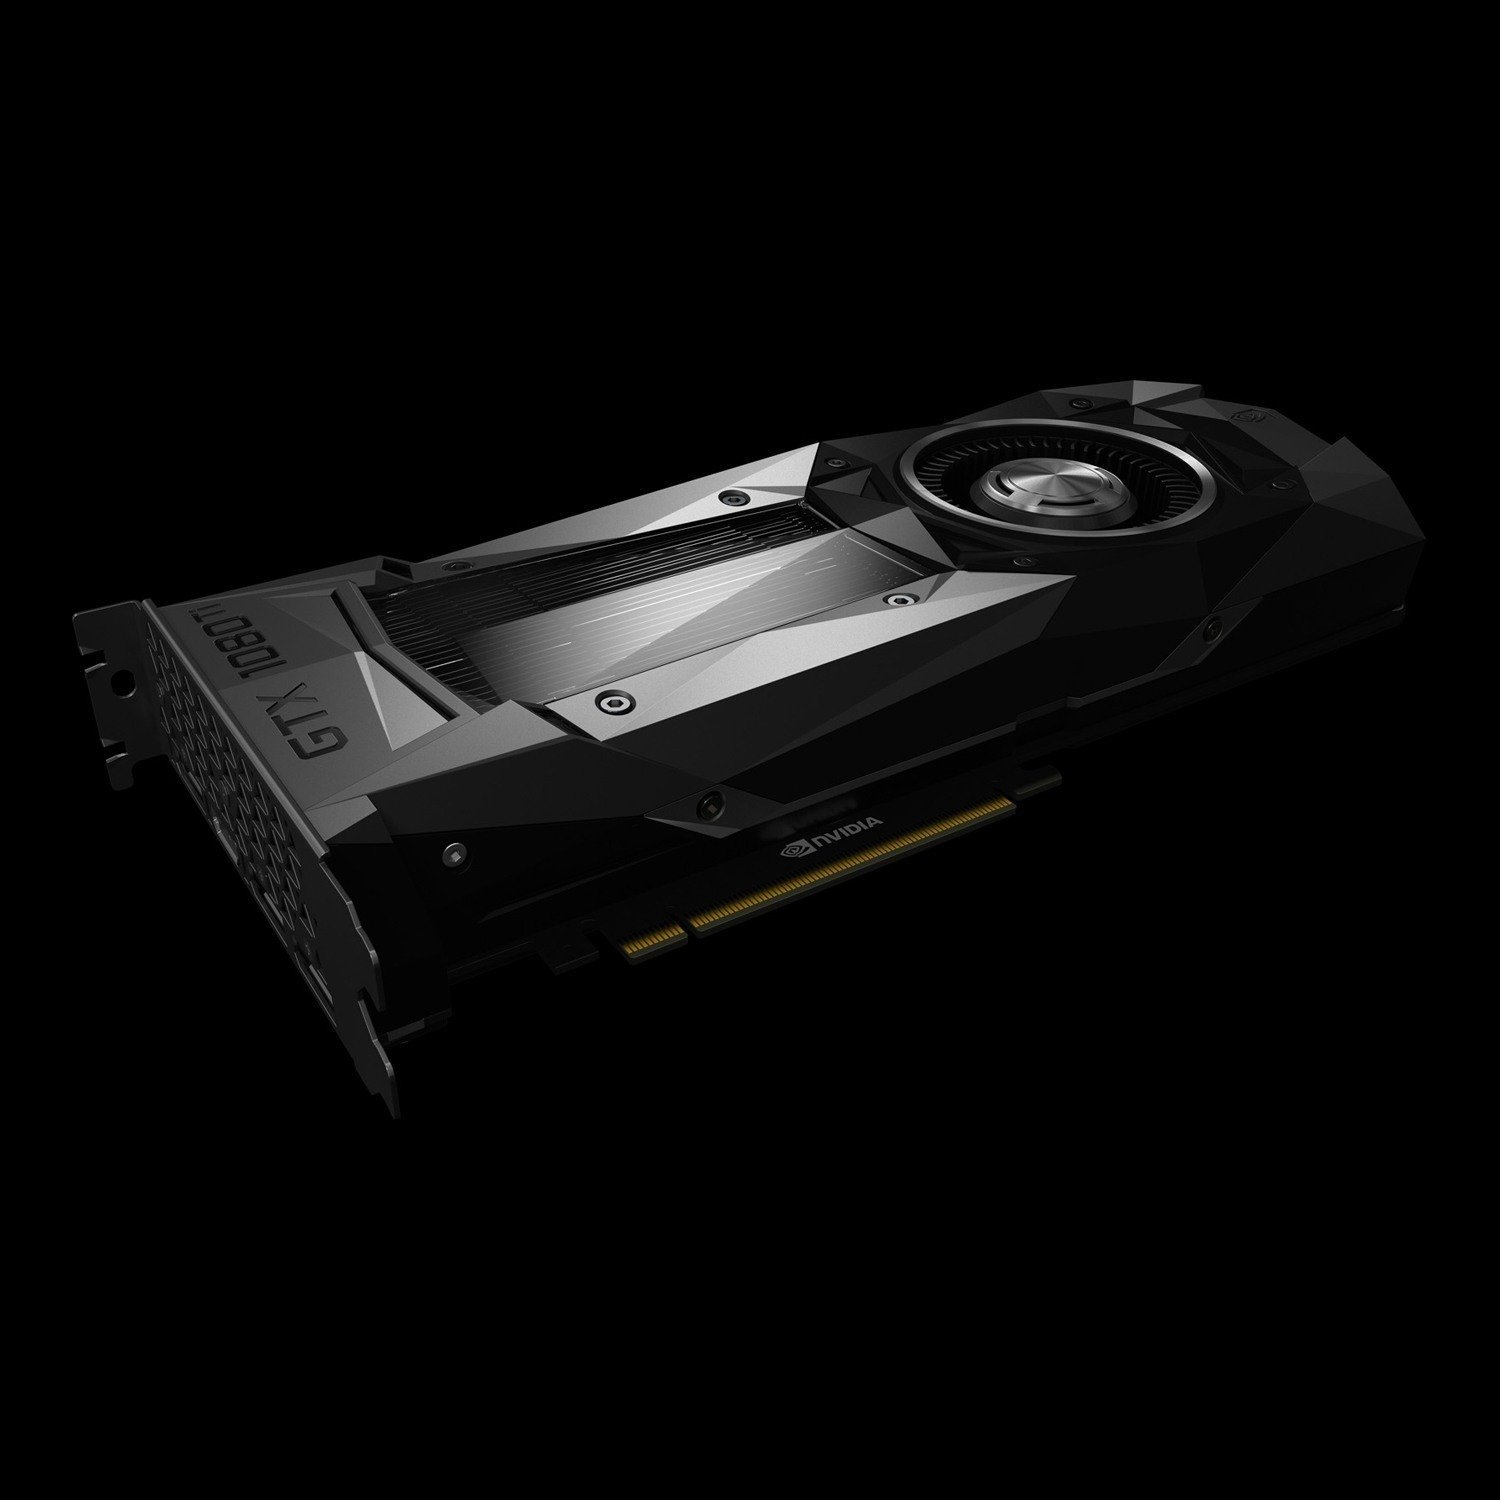 GeForce GTX 1080 Ti: Founders Edition Graphics Card